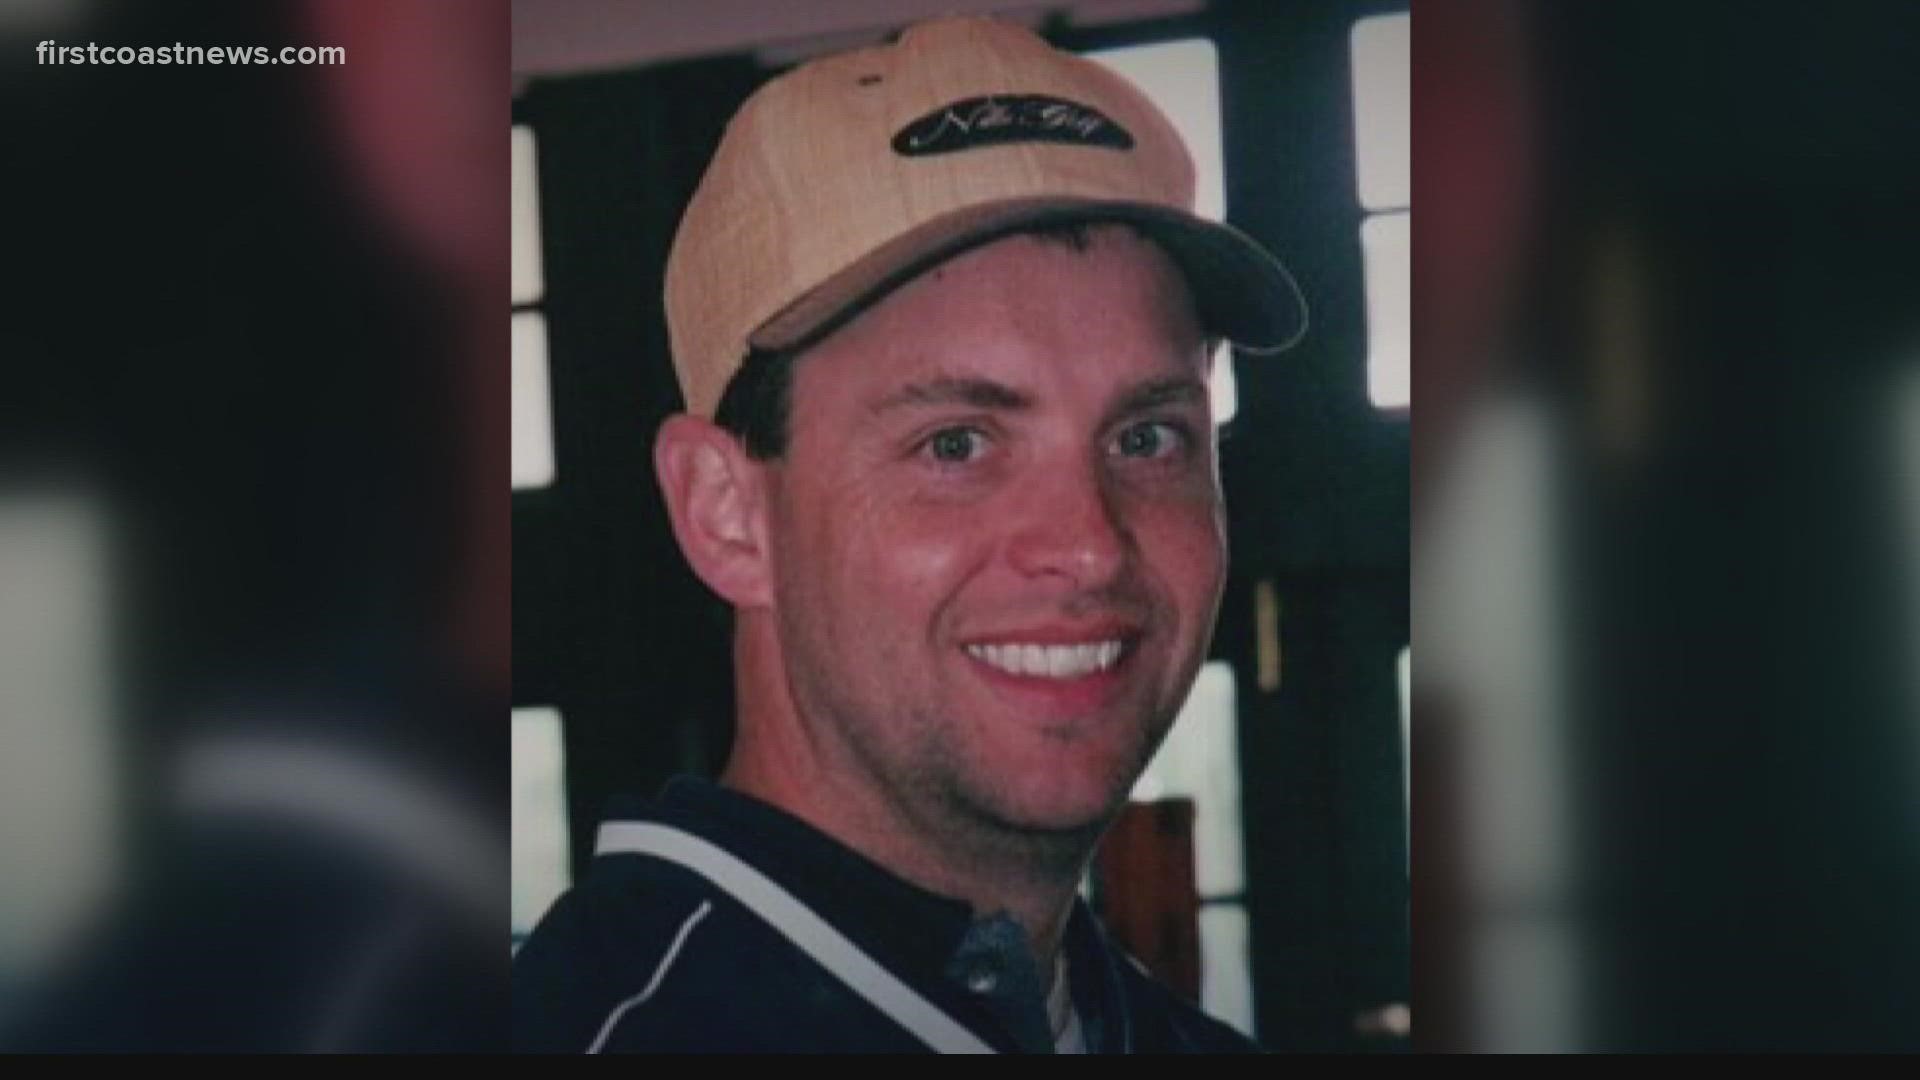 Todd Beamer was one of several Americans who spared our capital from a second terrorist attack. His Dad talks about what we may not have known from 9/11